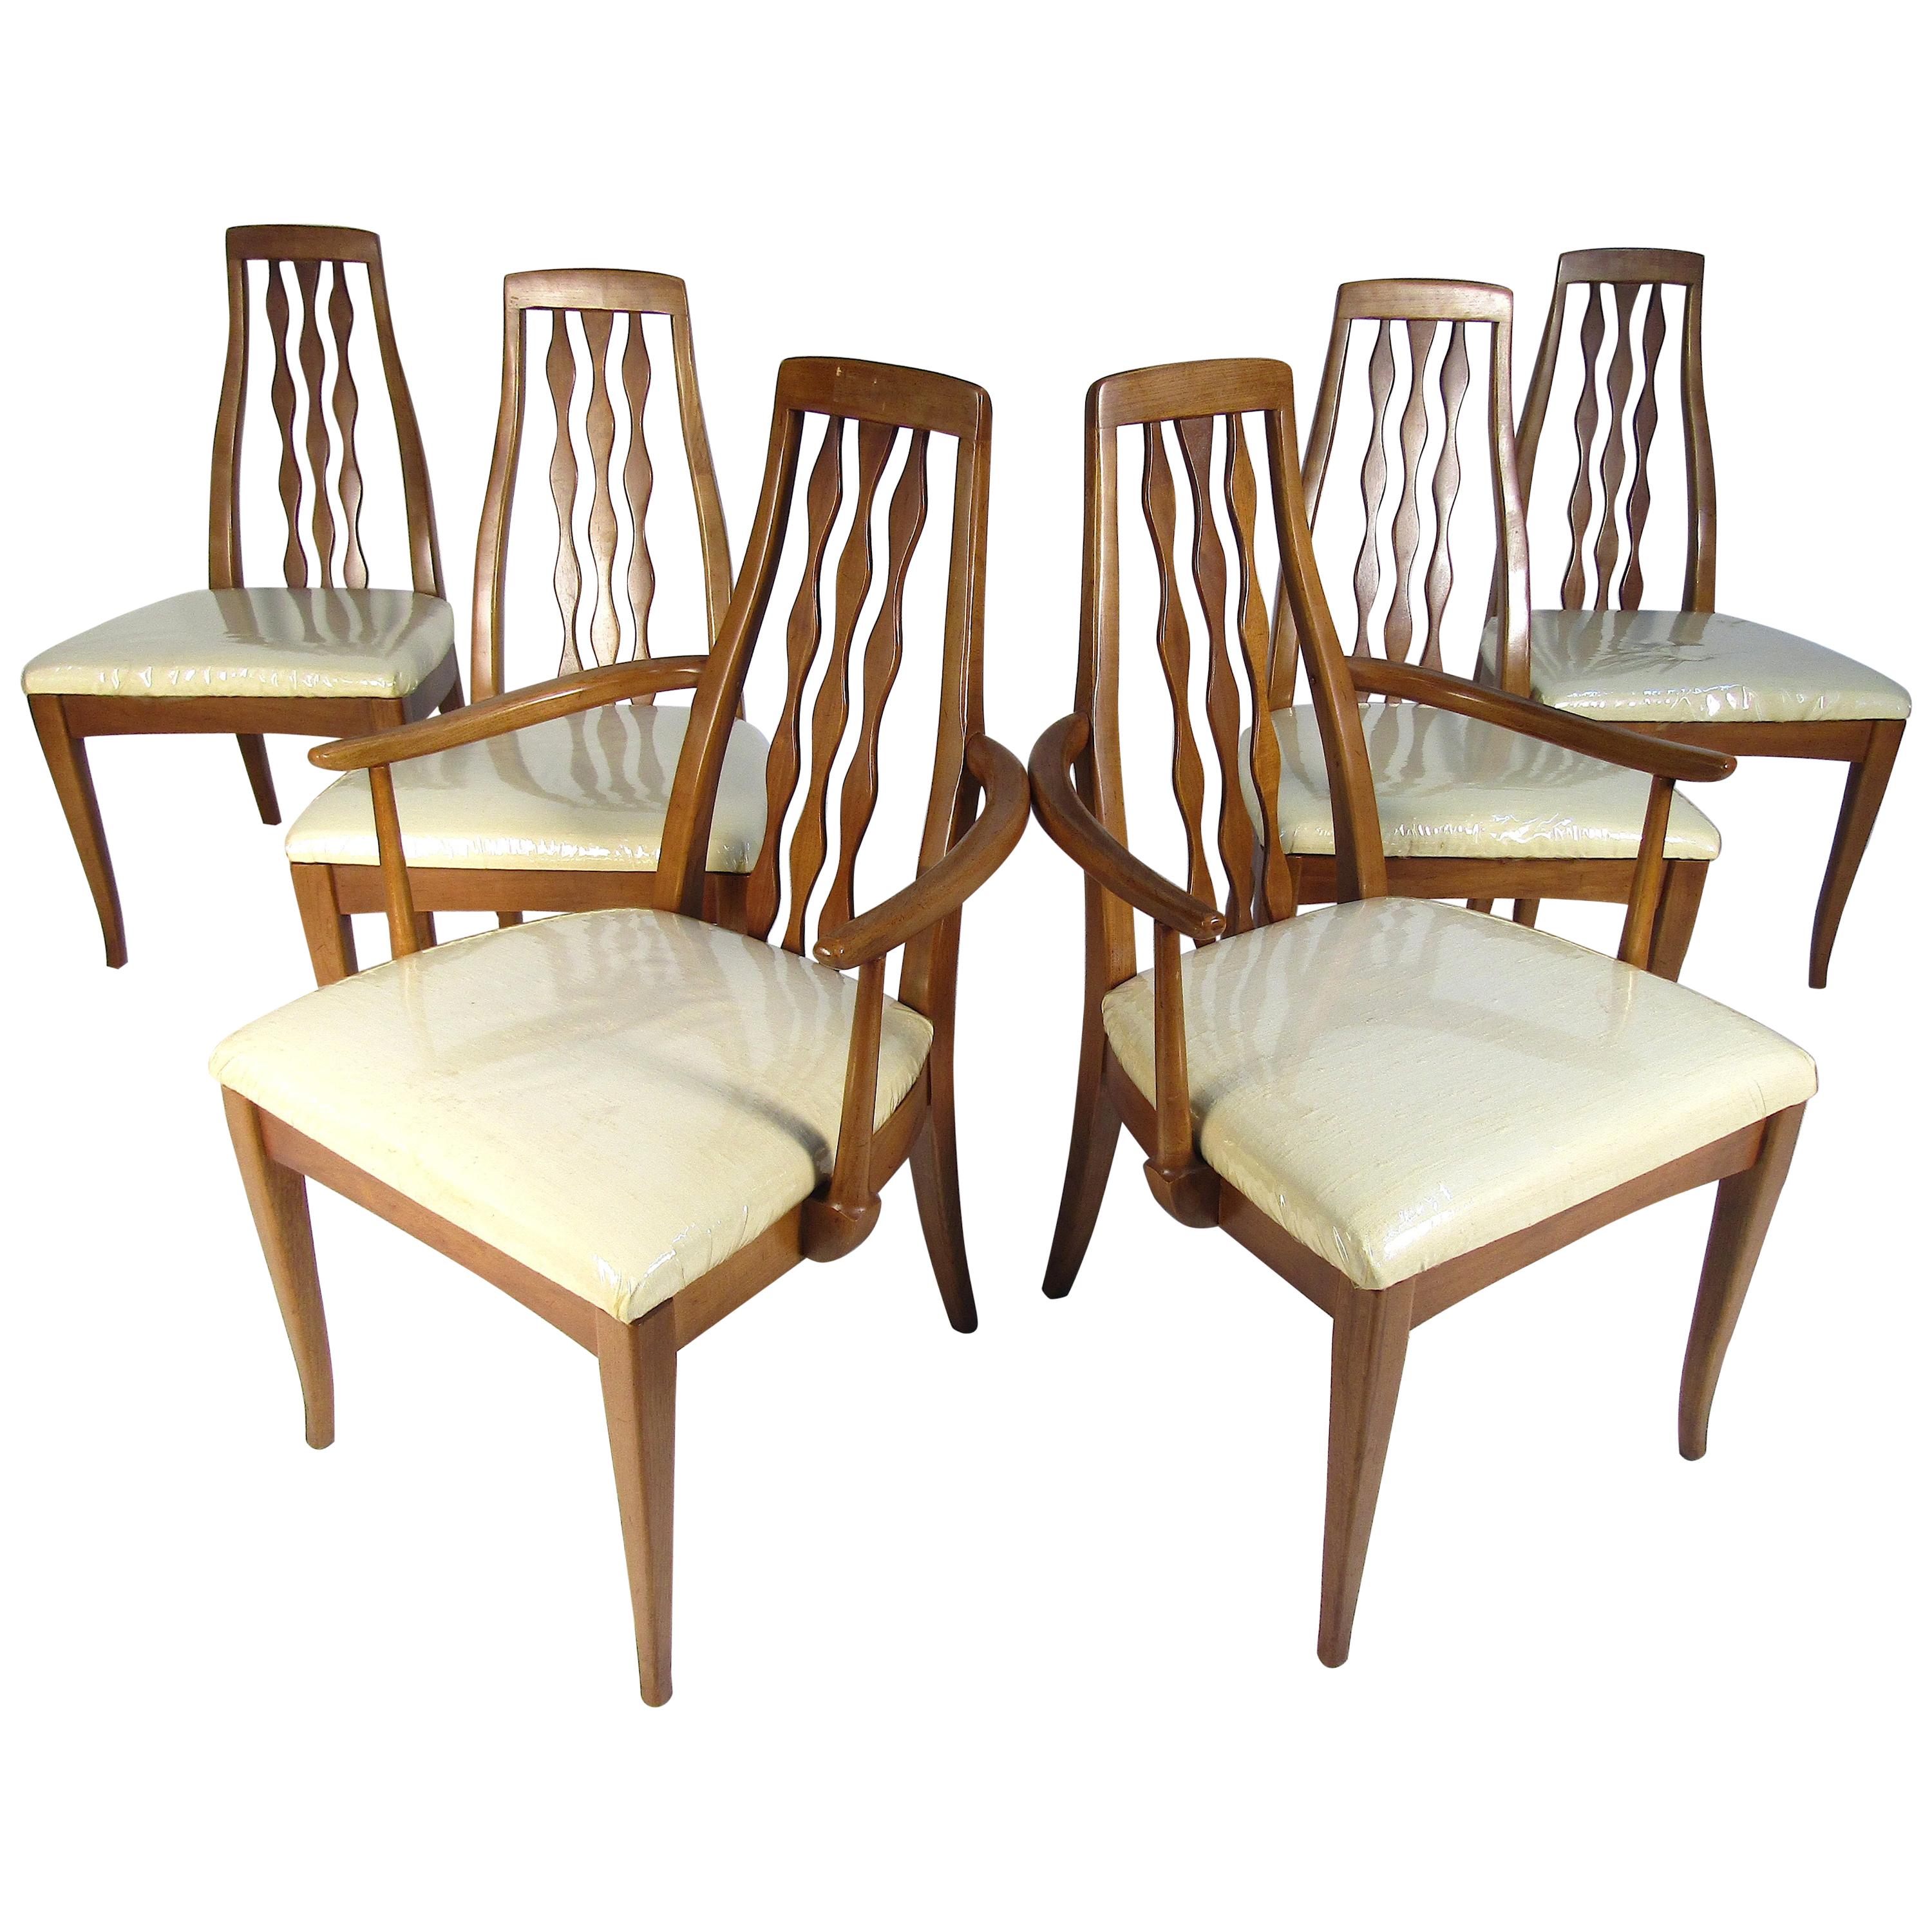 Mid-Century Modern Dining Chairs by American of Martinsville, Set of 6